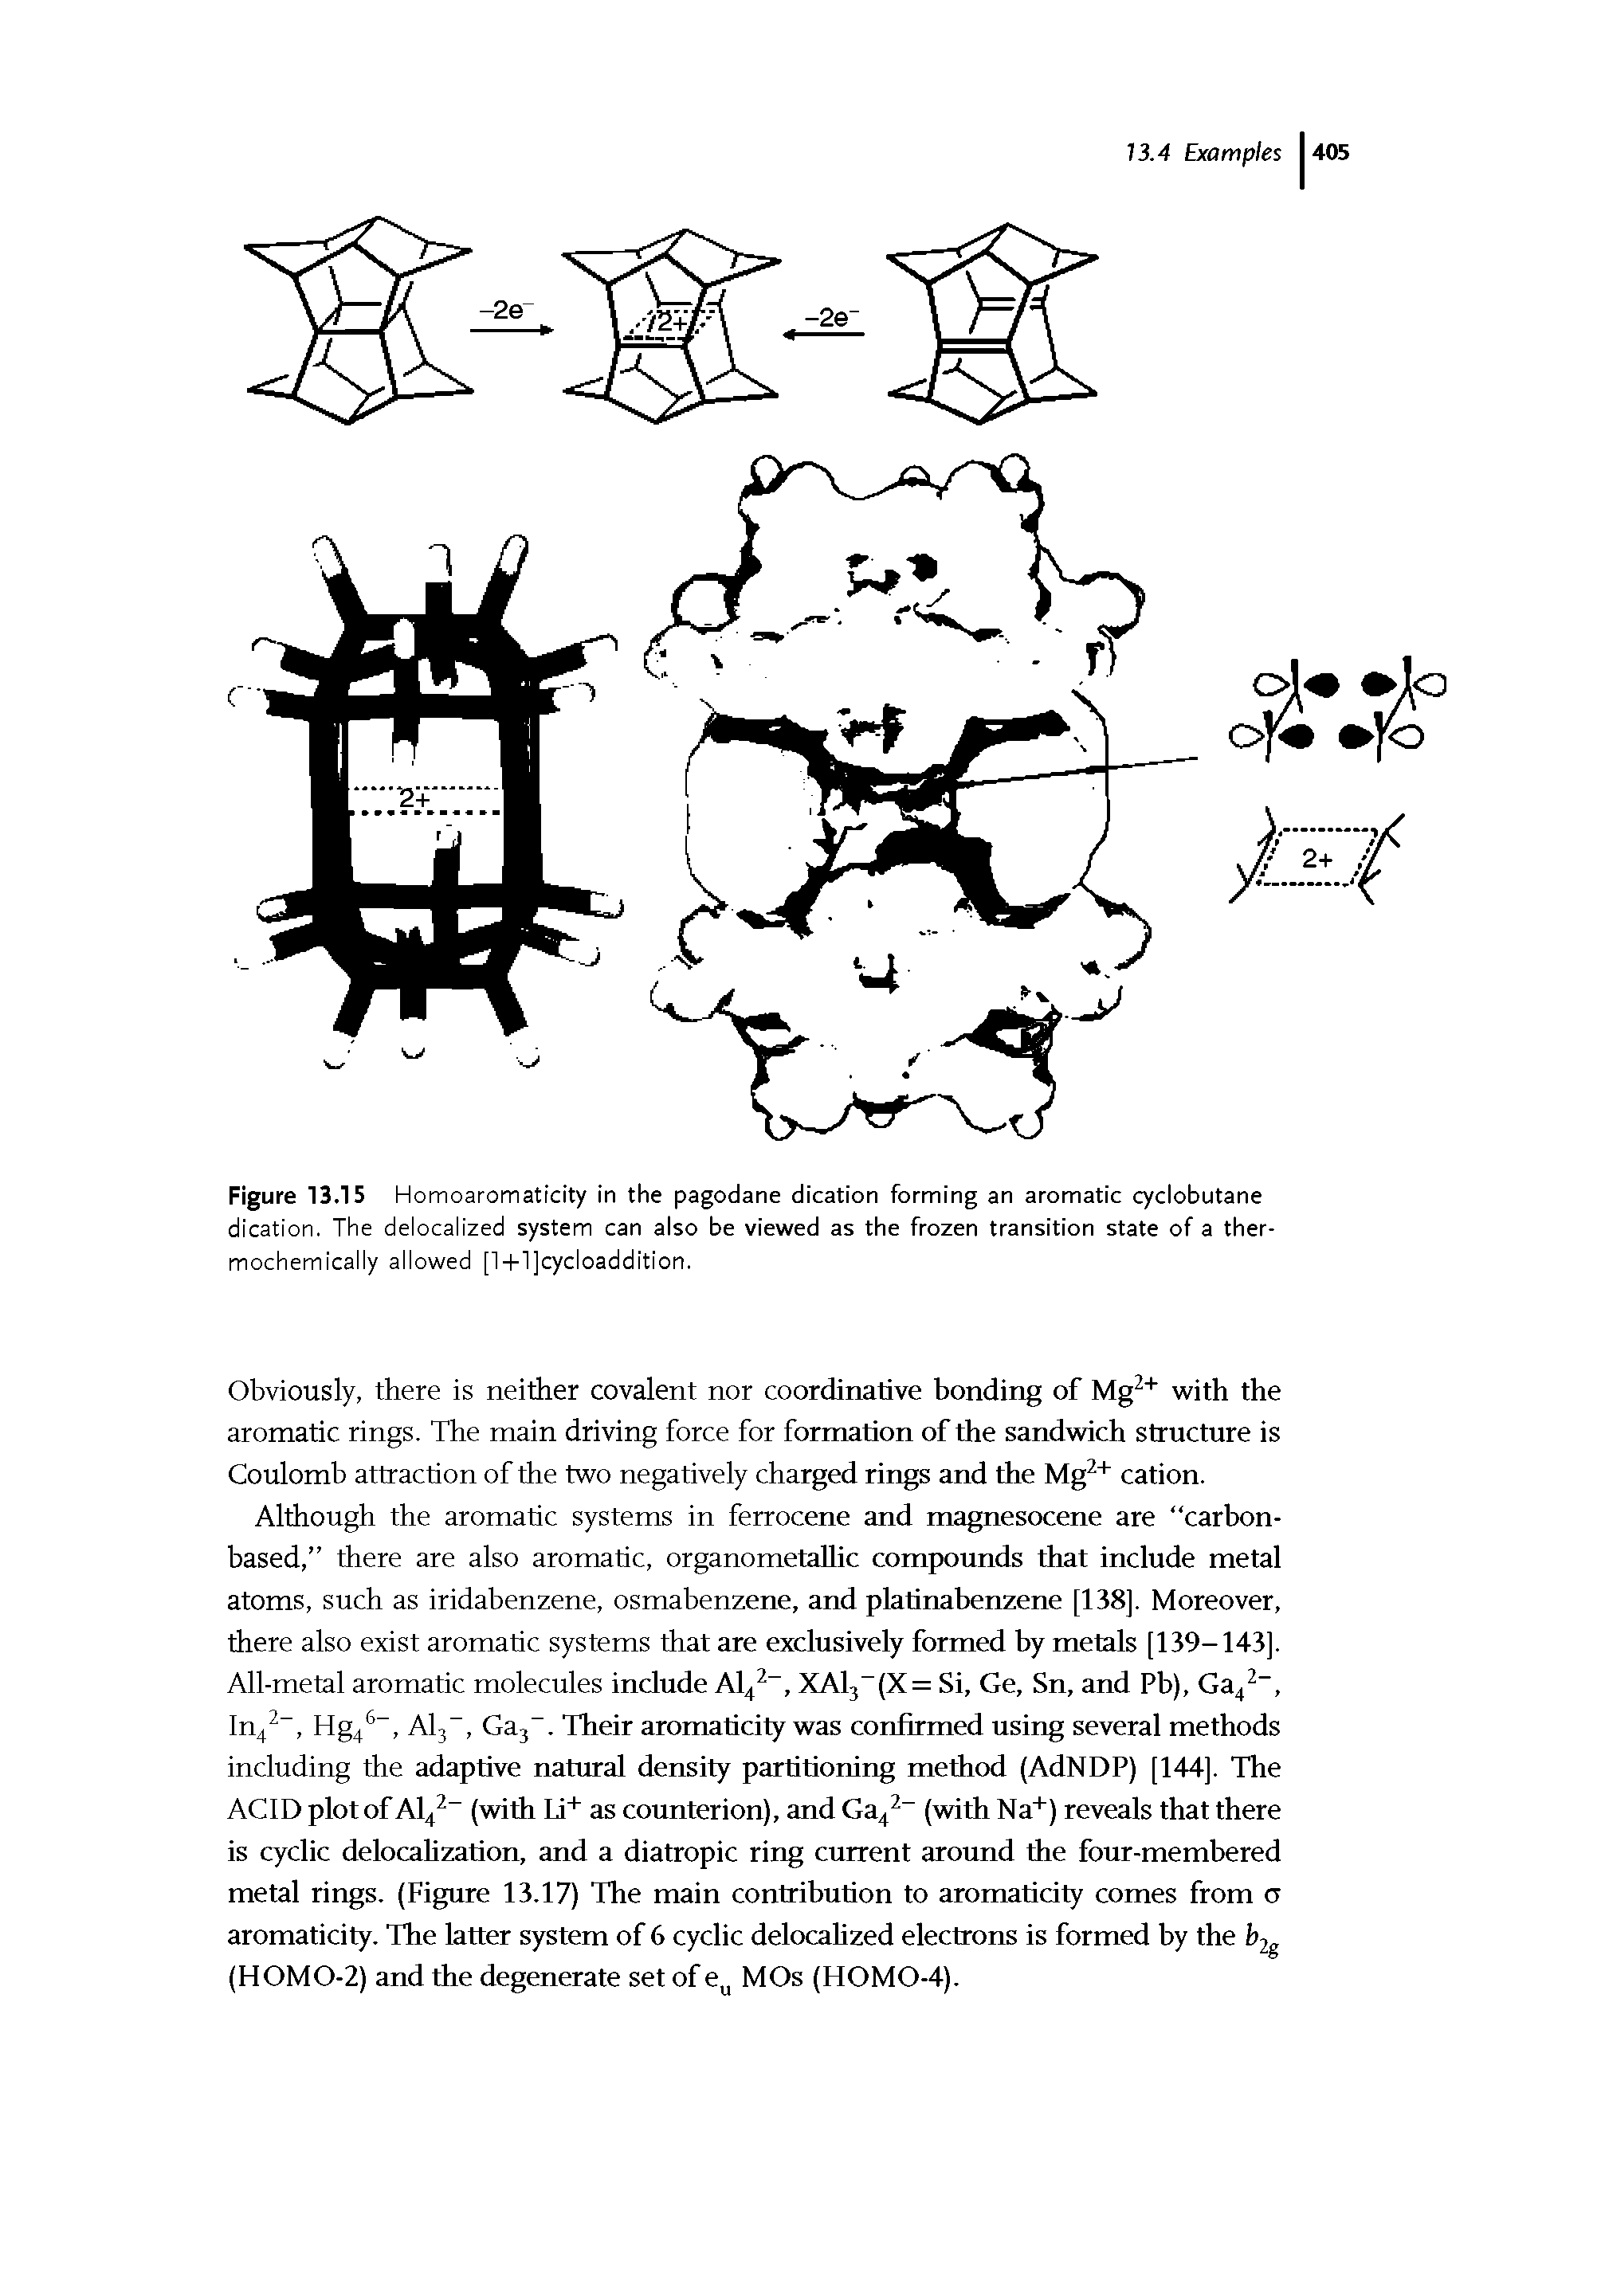 Figure 13.15 Homoaromaticity in the pagodane dication forming an aromatic cyclobutane dication. The deiocaiized system can also be viewed as the frozen transition state of a ther-mochemically allowed [l+l]cycloaddition.